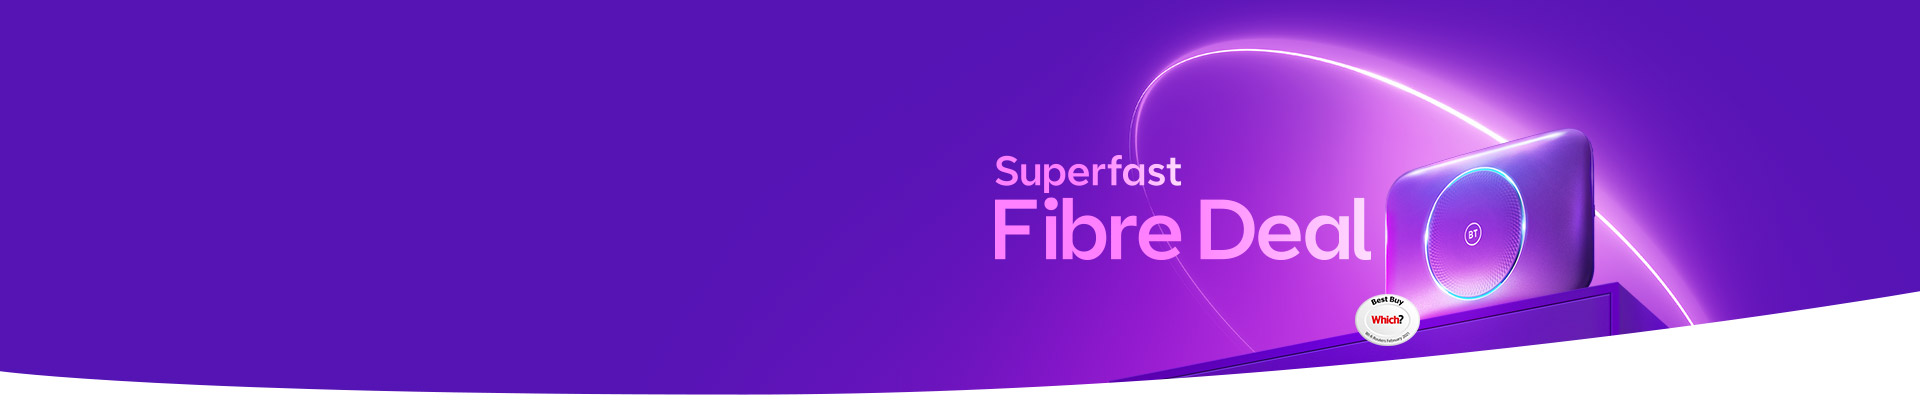 BT Broadband has great superfast fibre deals and a hub that’s a Which Best Buy.